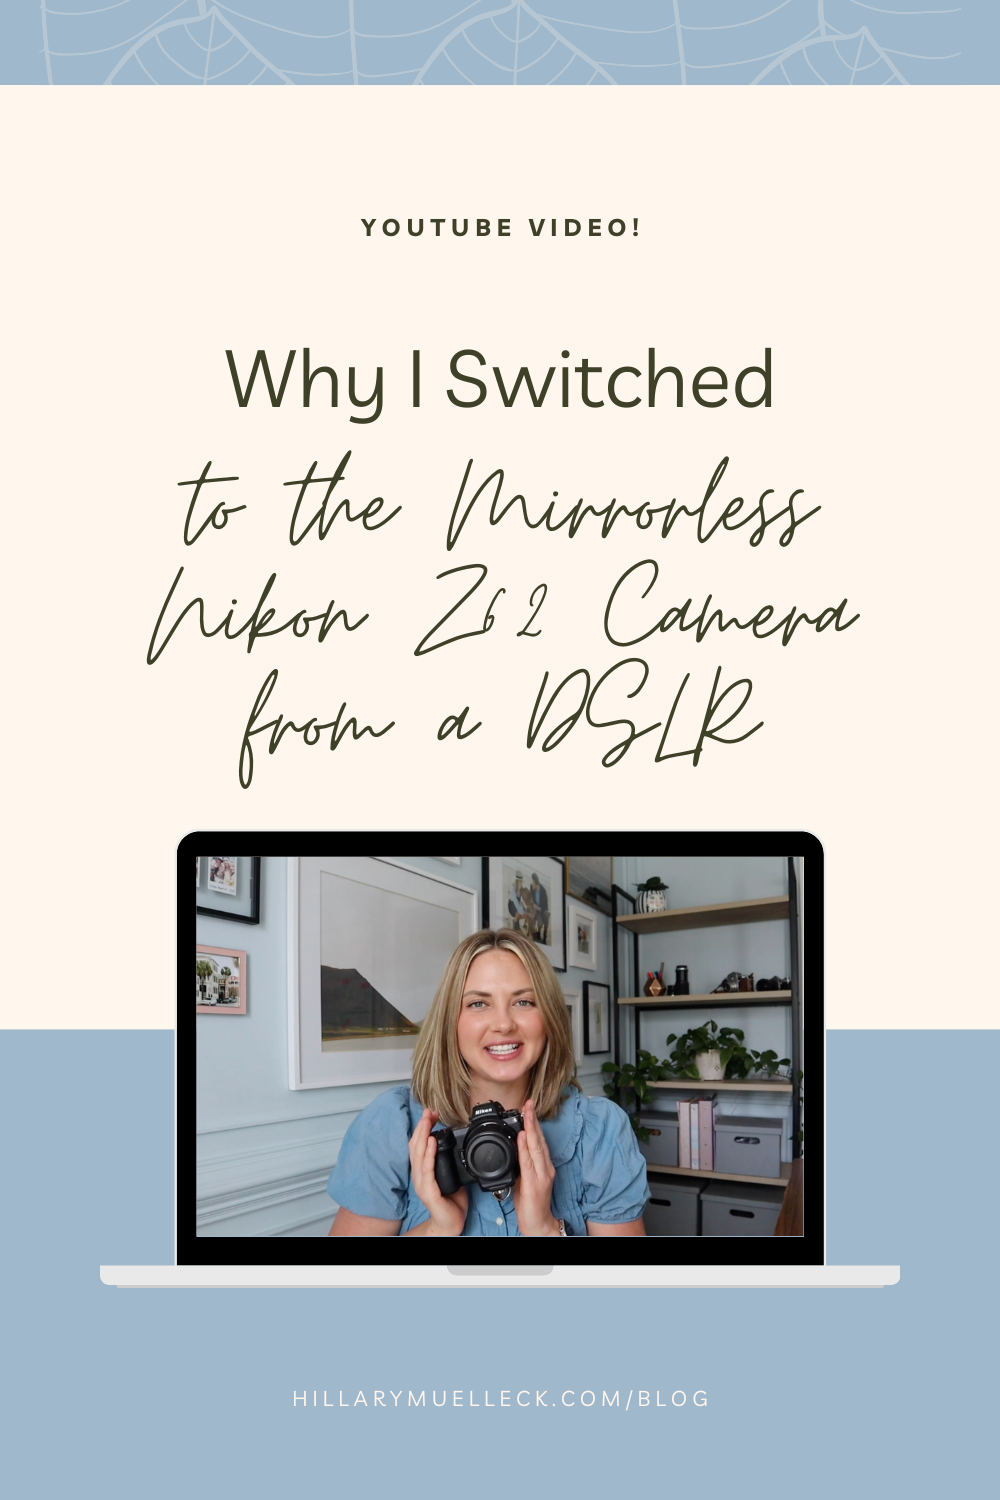 Hillary Muelleck reviews the Mirrorless Nikon Z62 Camera & shares why the switch to a mirrorless camera from DLSR as a wedding photographer